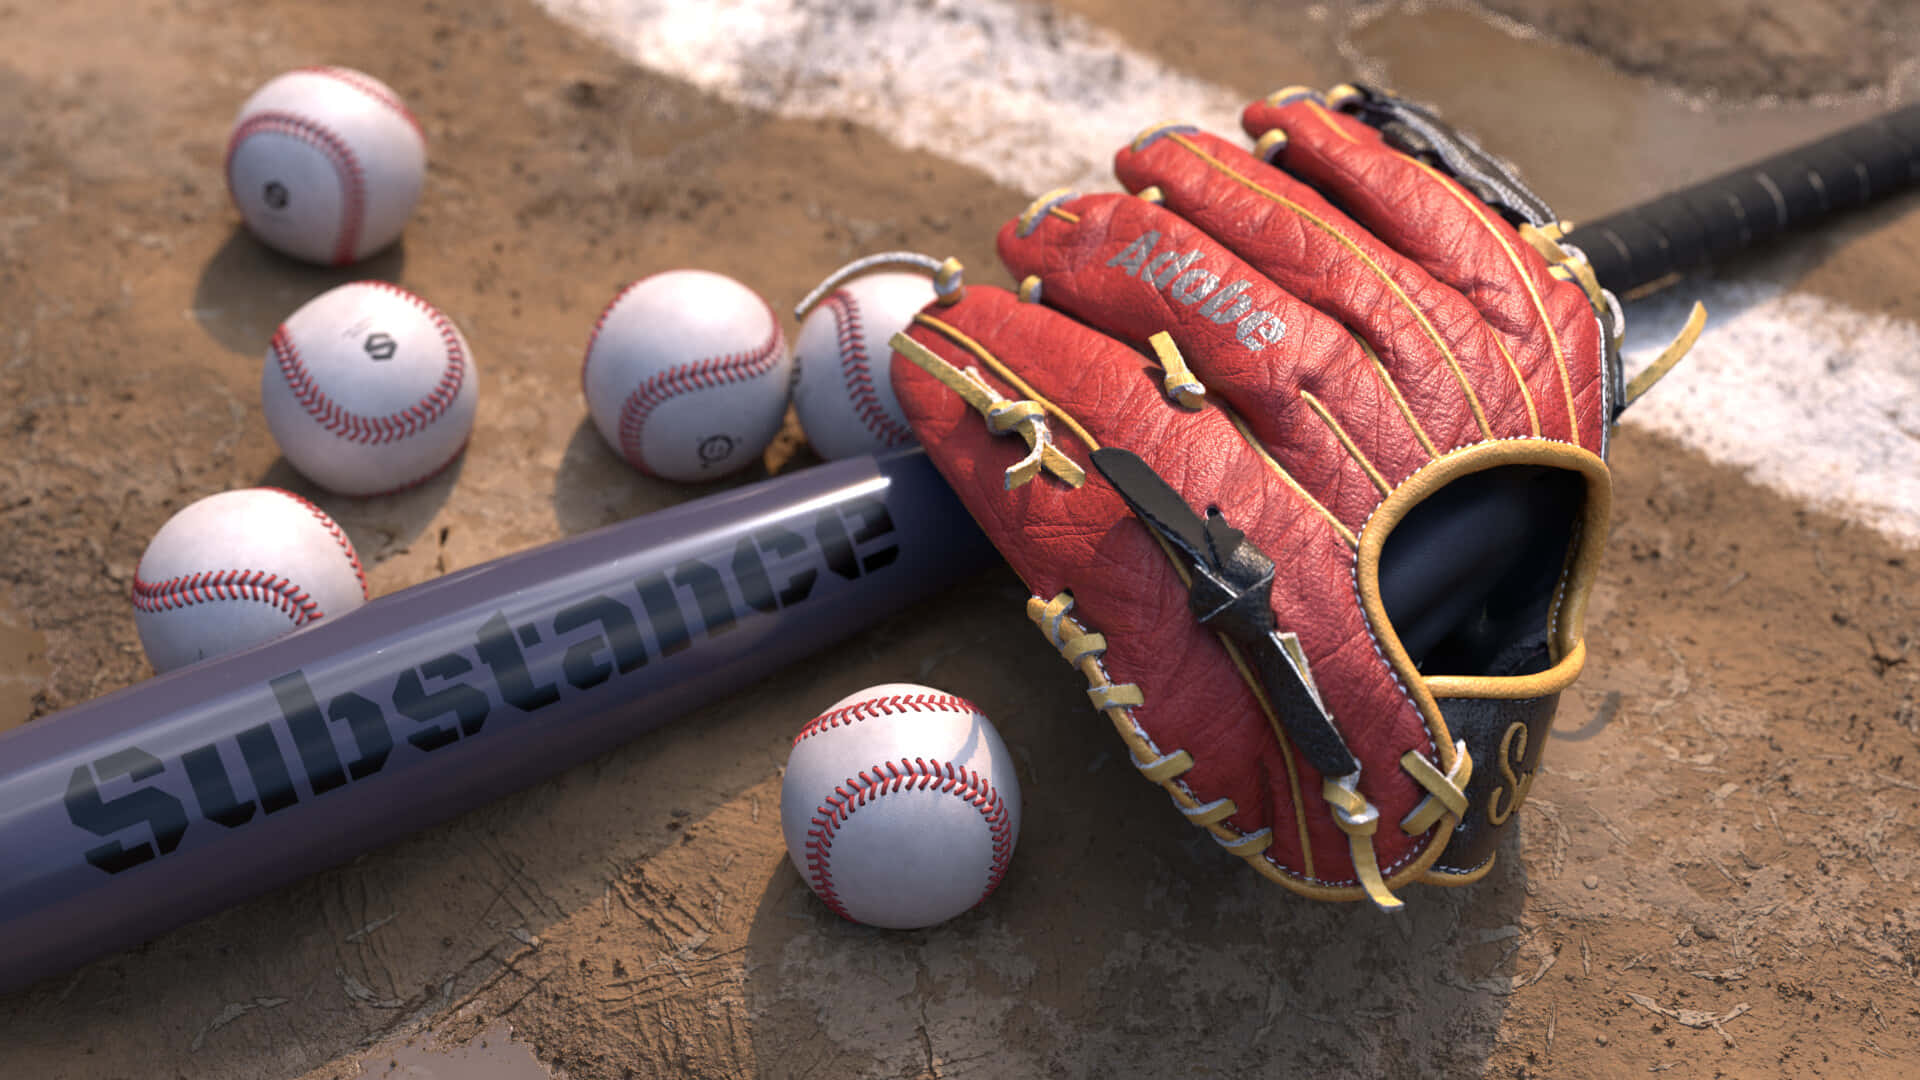 A collection of baseball gloves showcasing various colors and designs Wallpaper